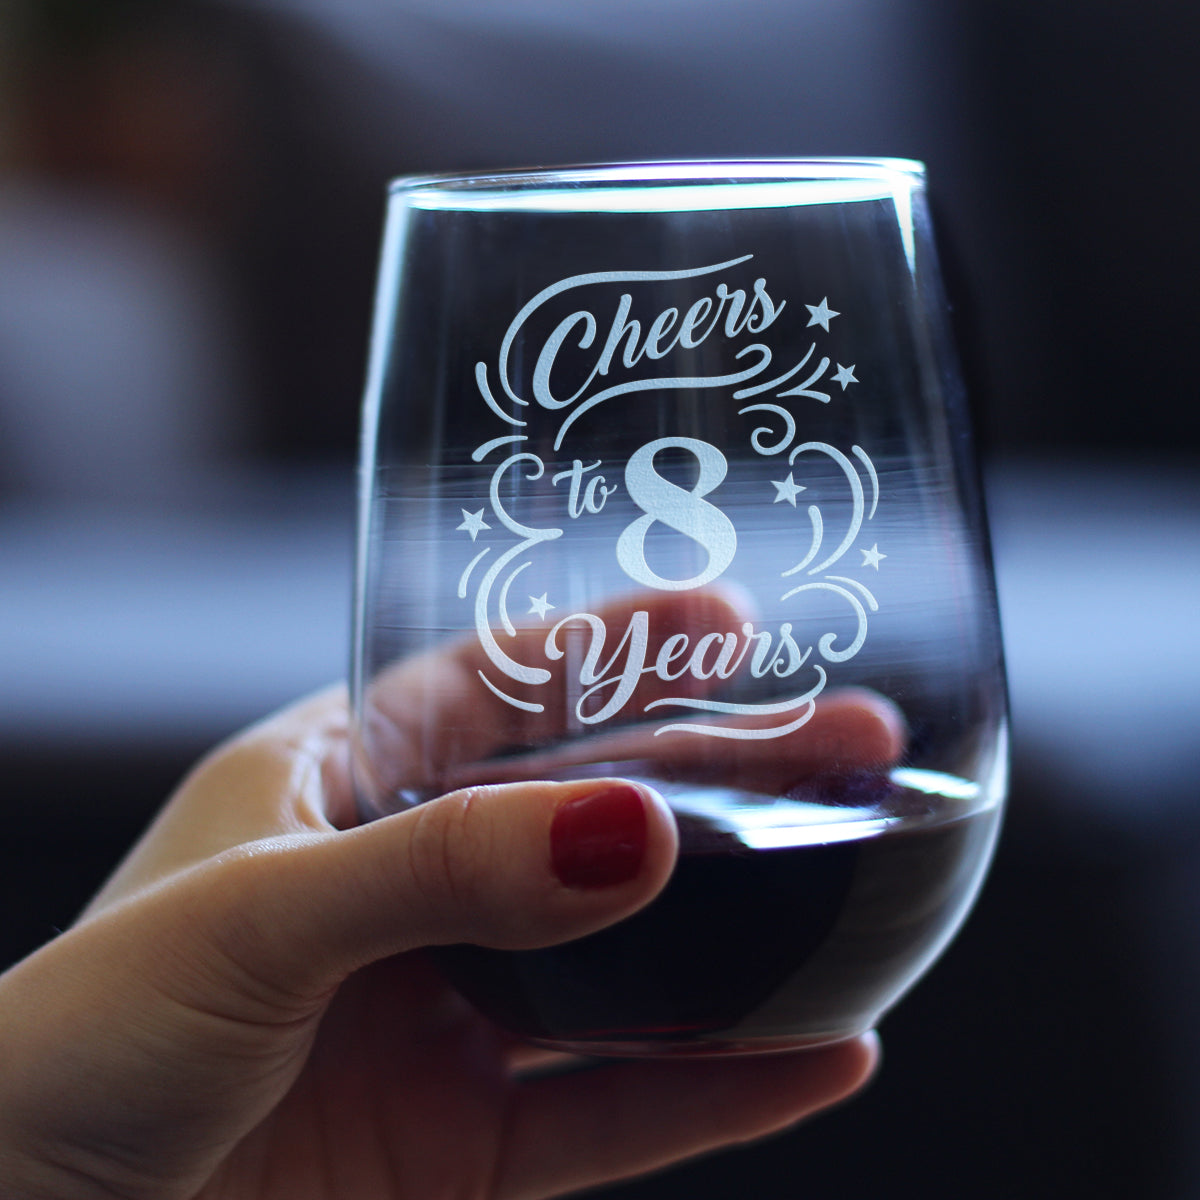 Cheers to 8 Years - Stemless Wine Glass Gifts for Women &amp; Men - 8th Anniversary Party Decor - Large 17 Oz Glasses